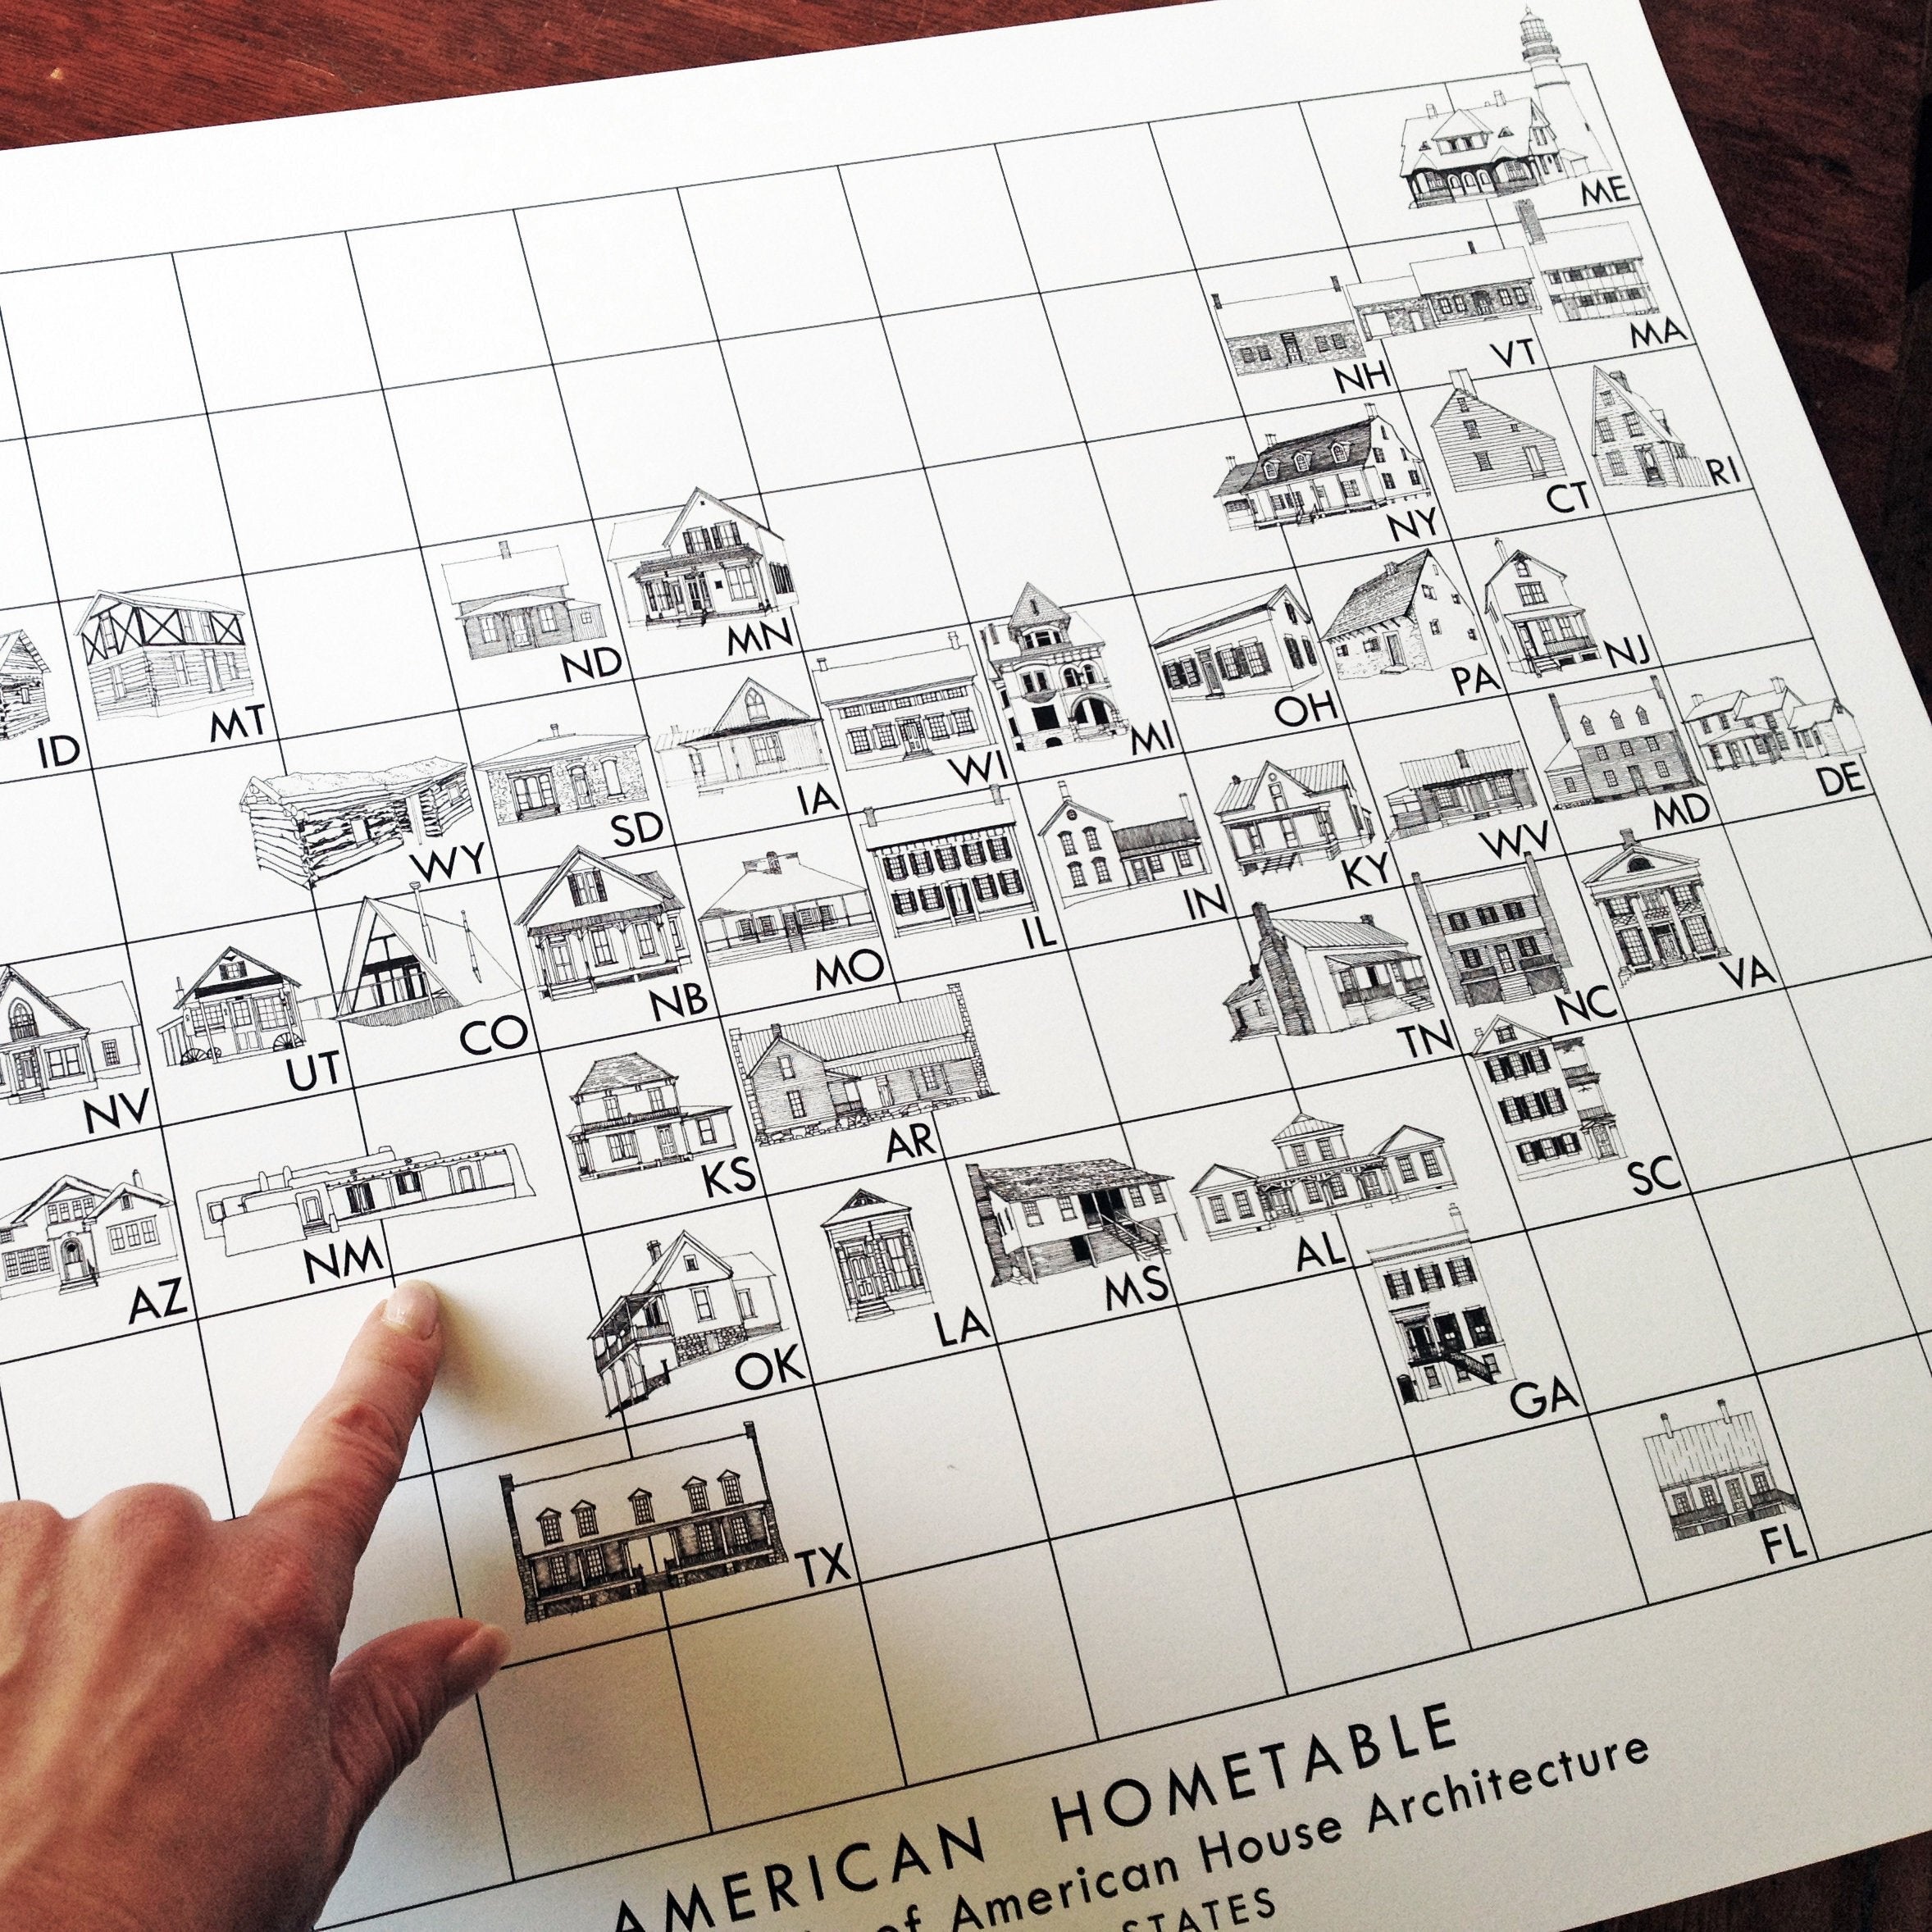 AMERICAN HOMETABLE Architecture Map: PRINT